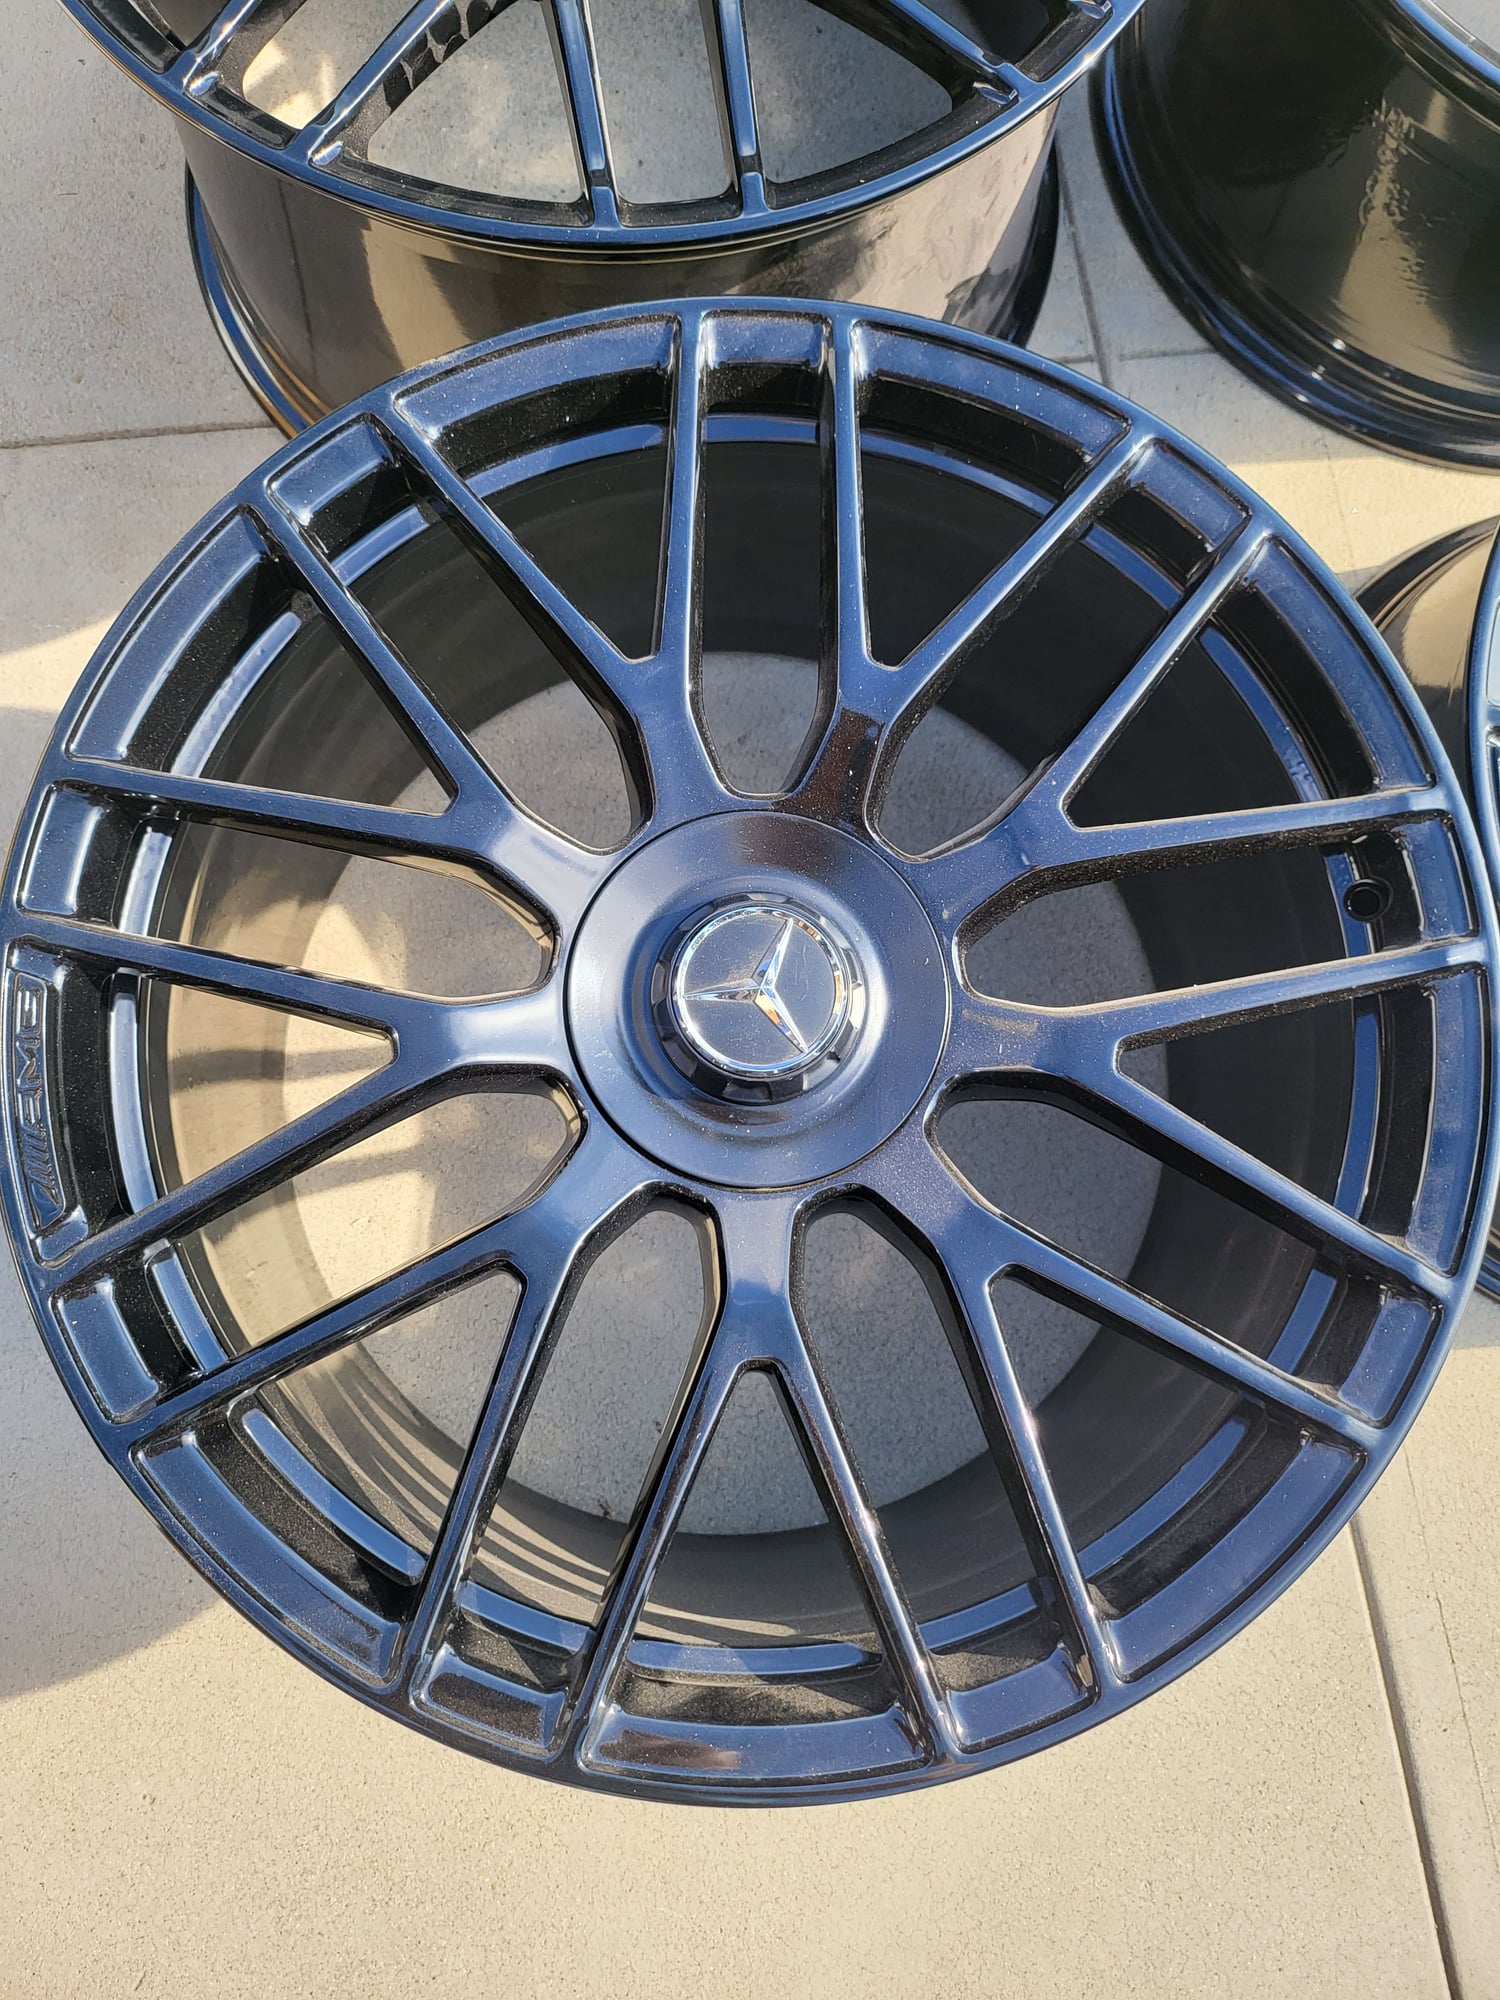 Wheels and Tires/Axles - AMG GTS Forged Cross-spoke Wheels - Used - 0  All Models - Van Nuys, CA 91406, United States